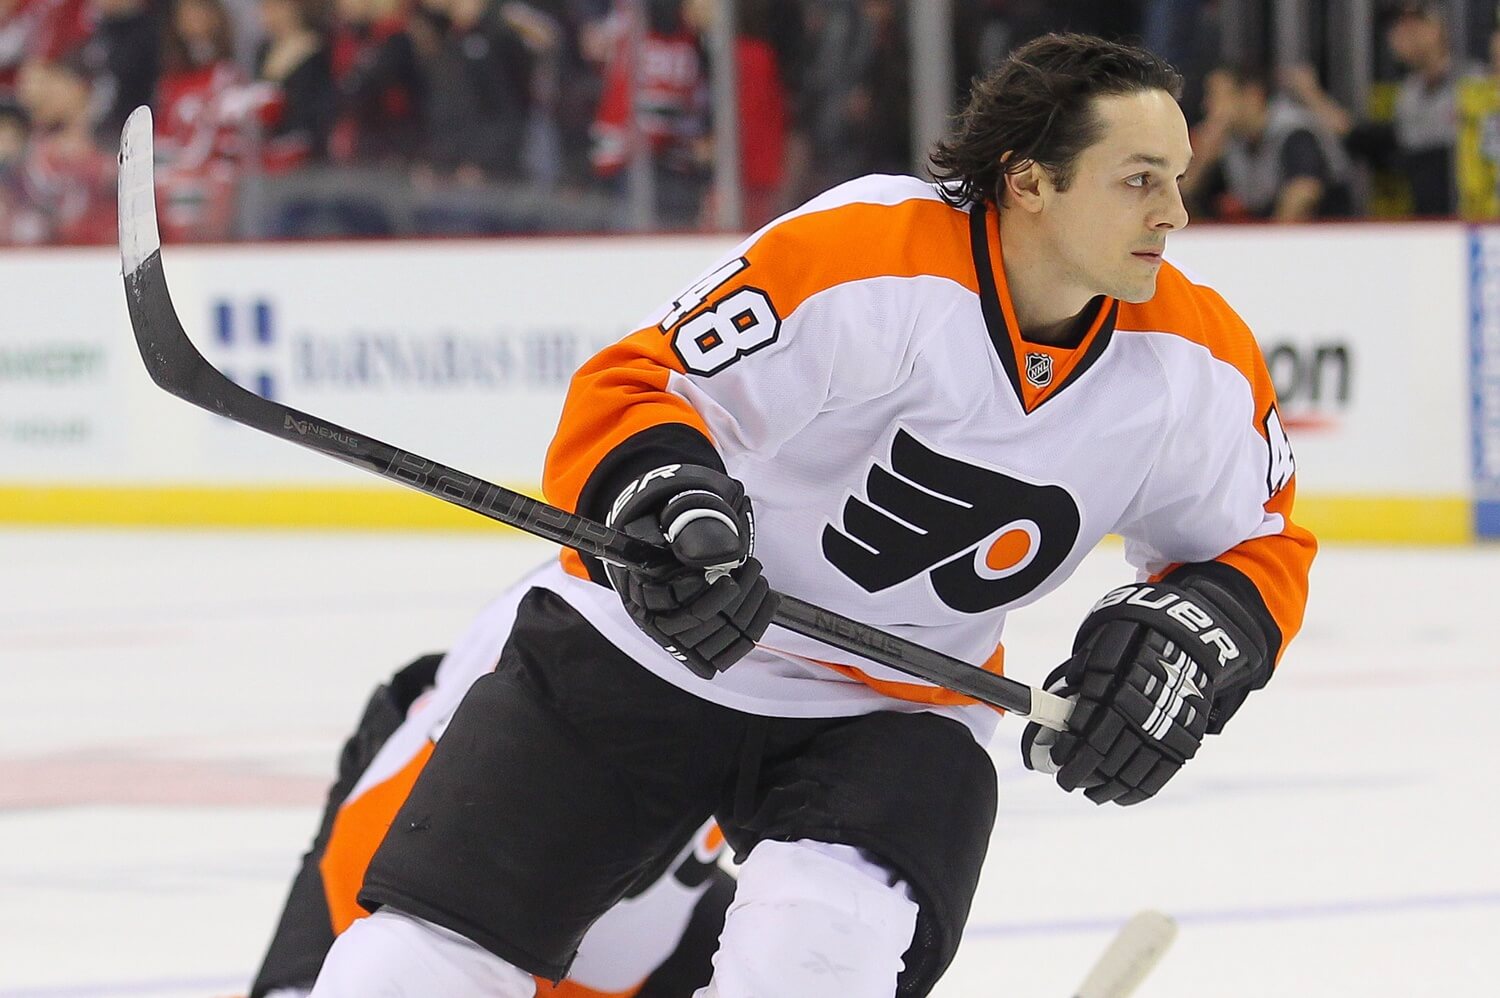 Welcome back Danny Briere, as the Flyers officially announced as